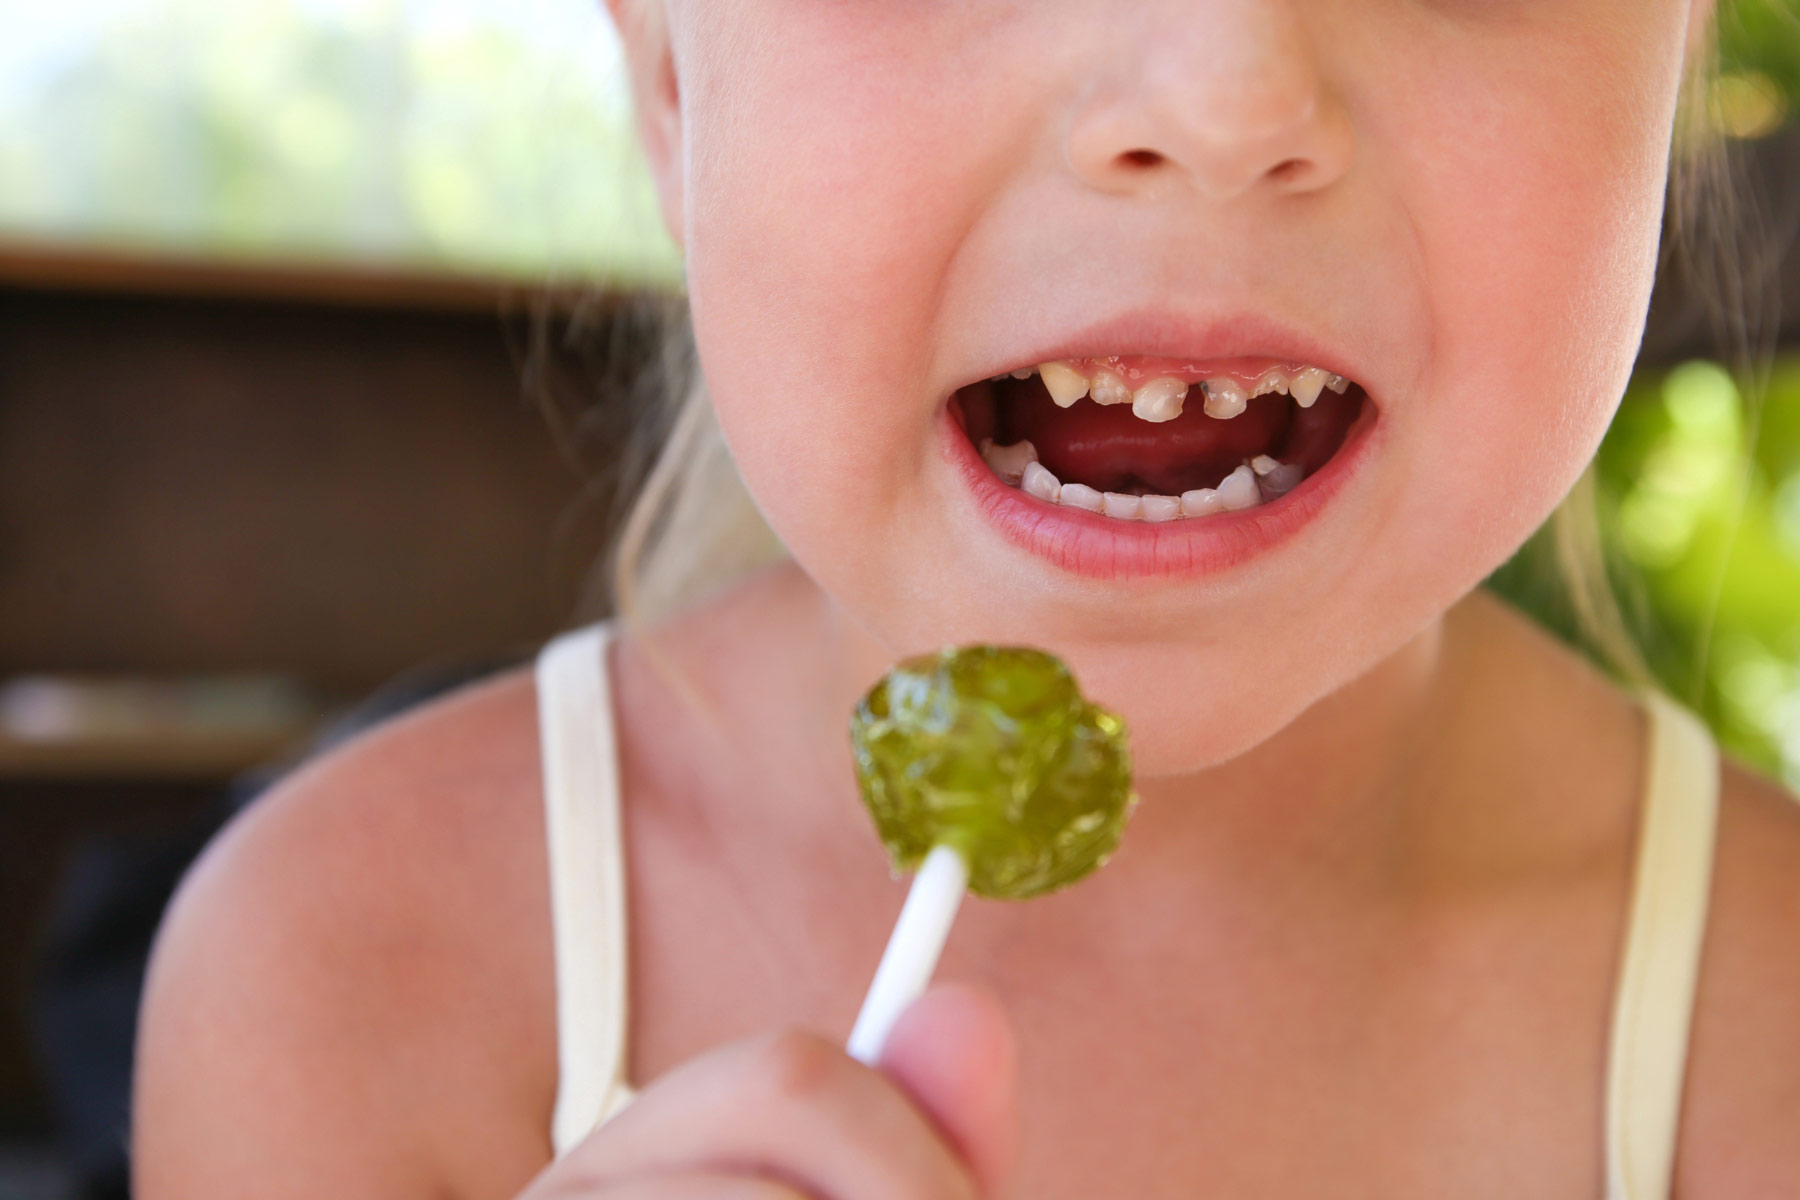 The truth about tooth decay